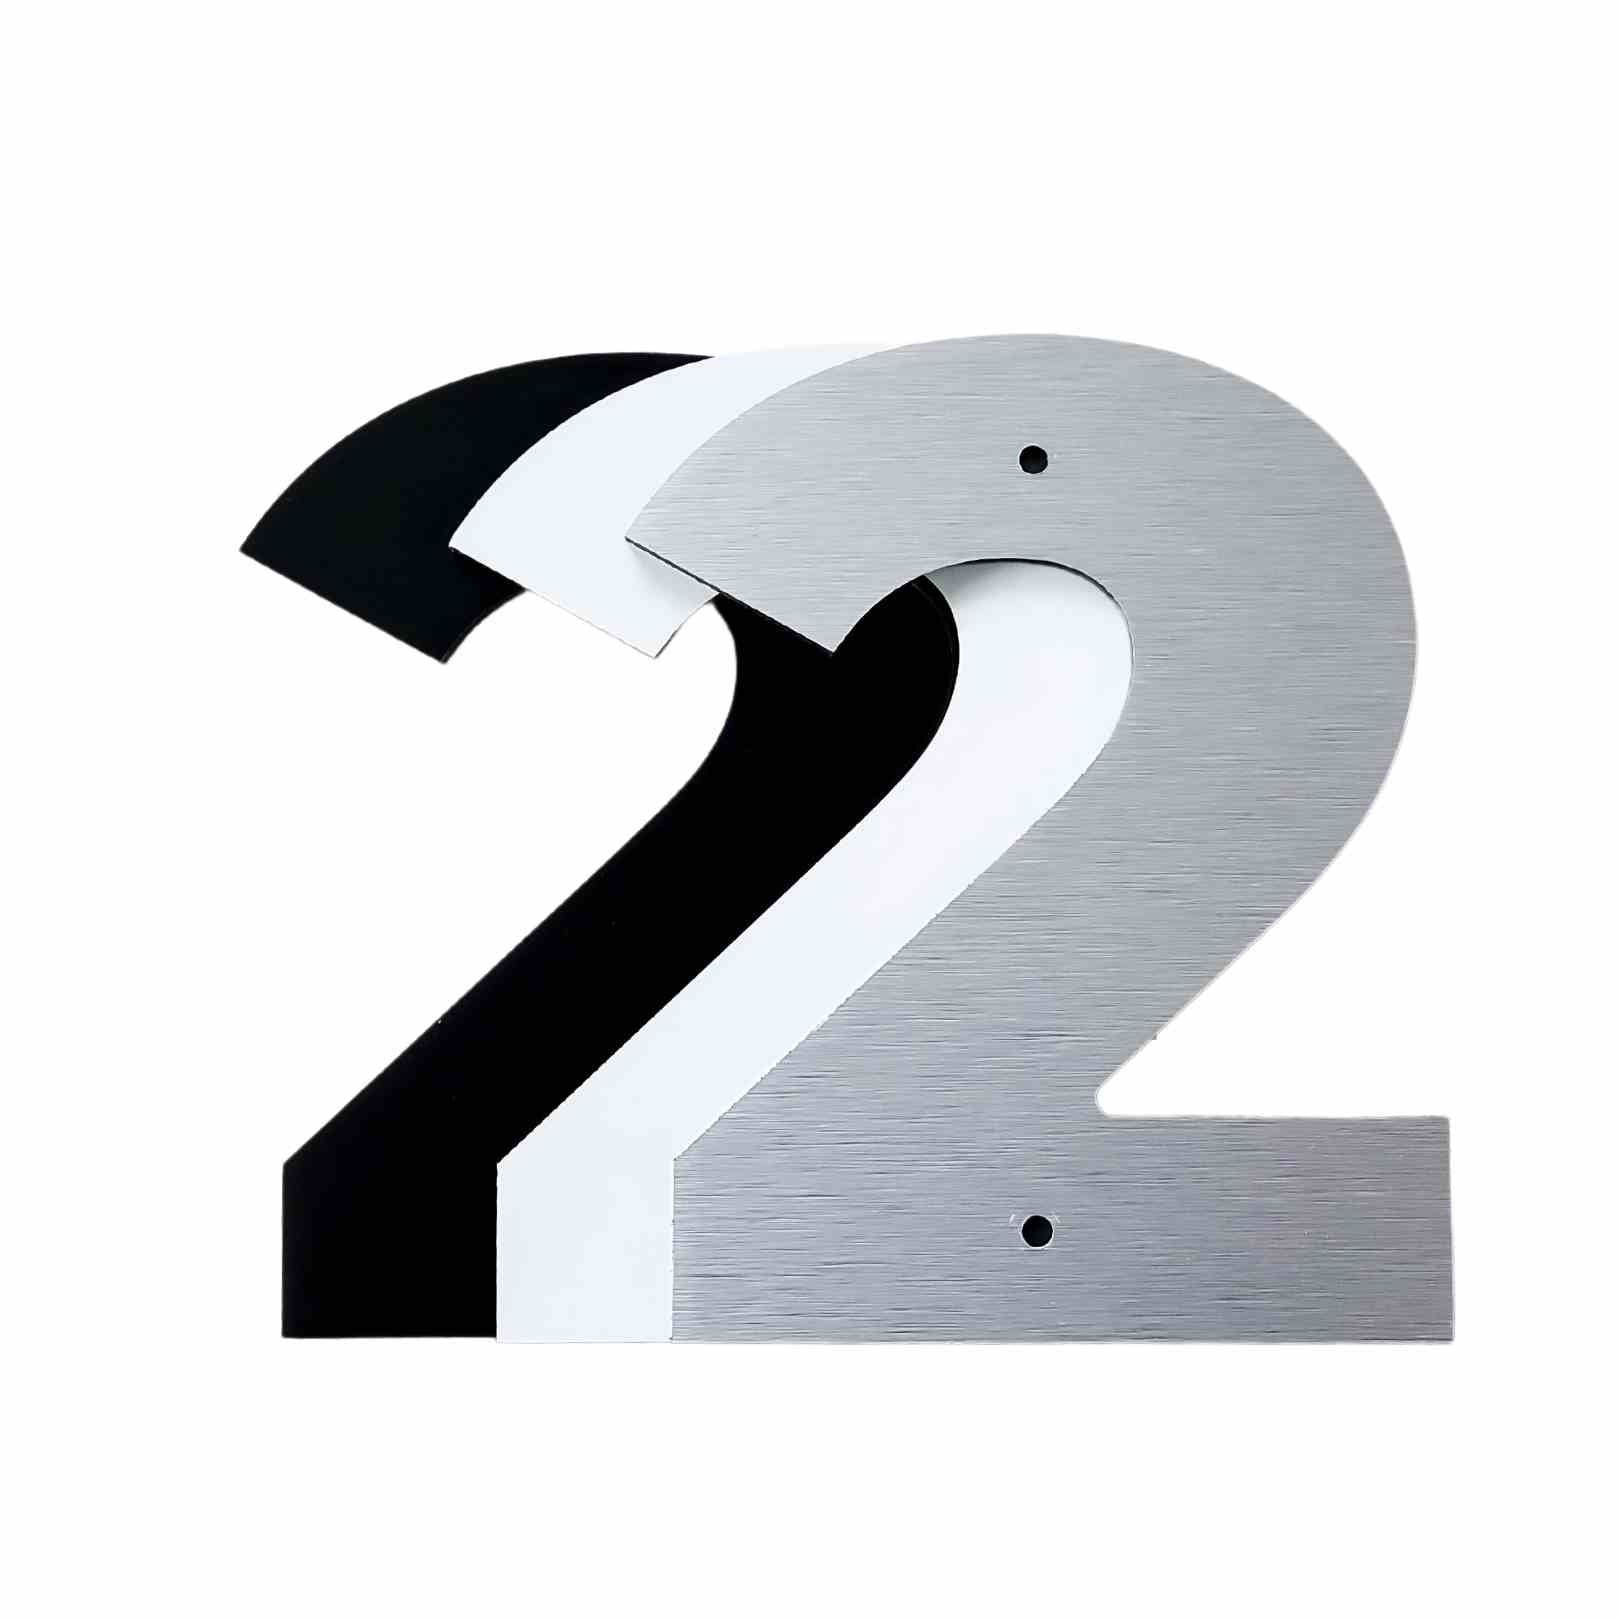 House numbers available in black, white and brushed silver colors